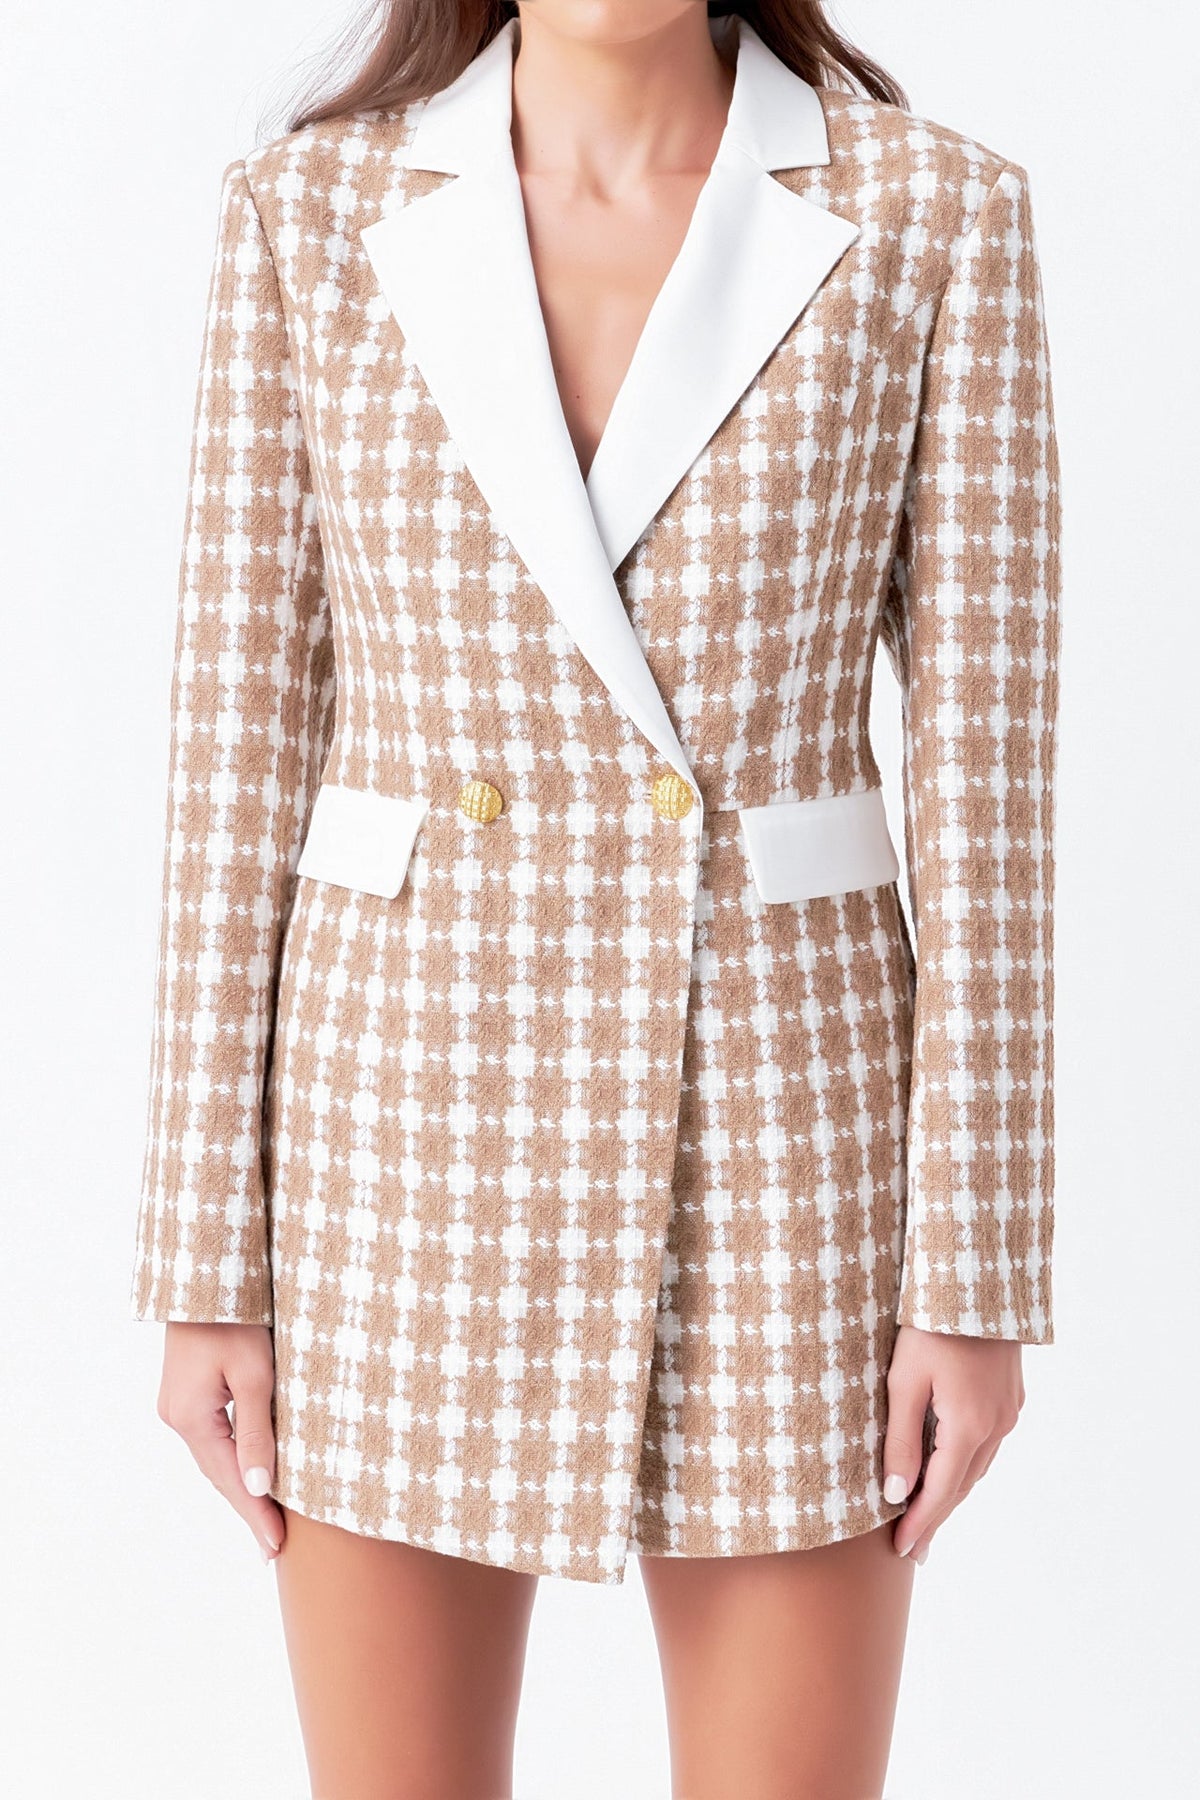 ENDLESS ROSE-Premium Houndstooth Blazer Romper-ROMPERS available at Objectrare